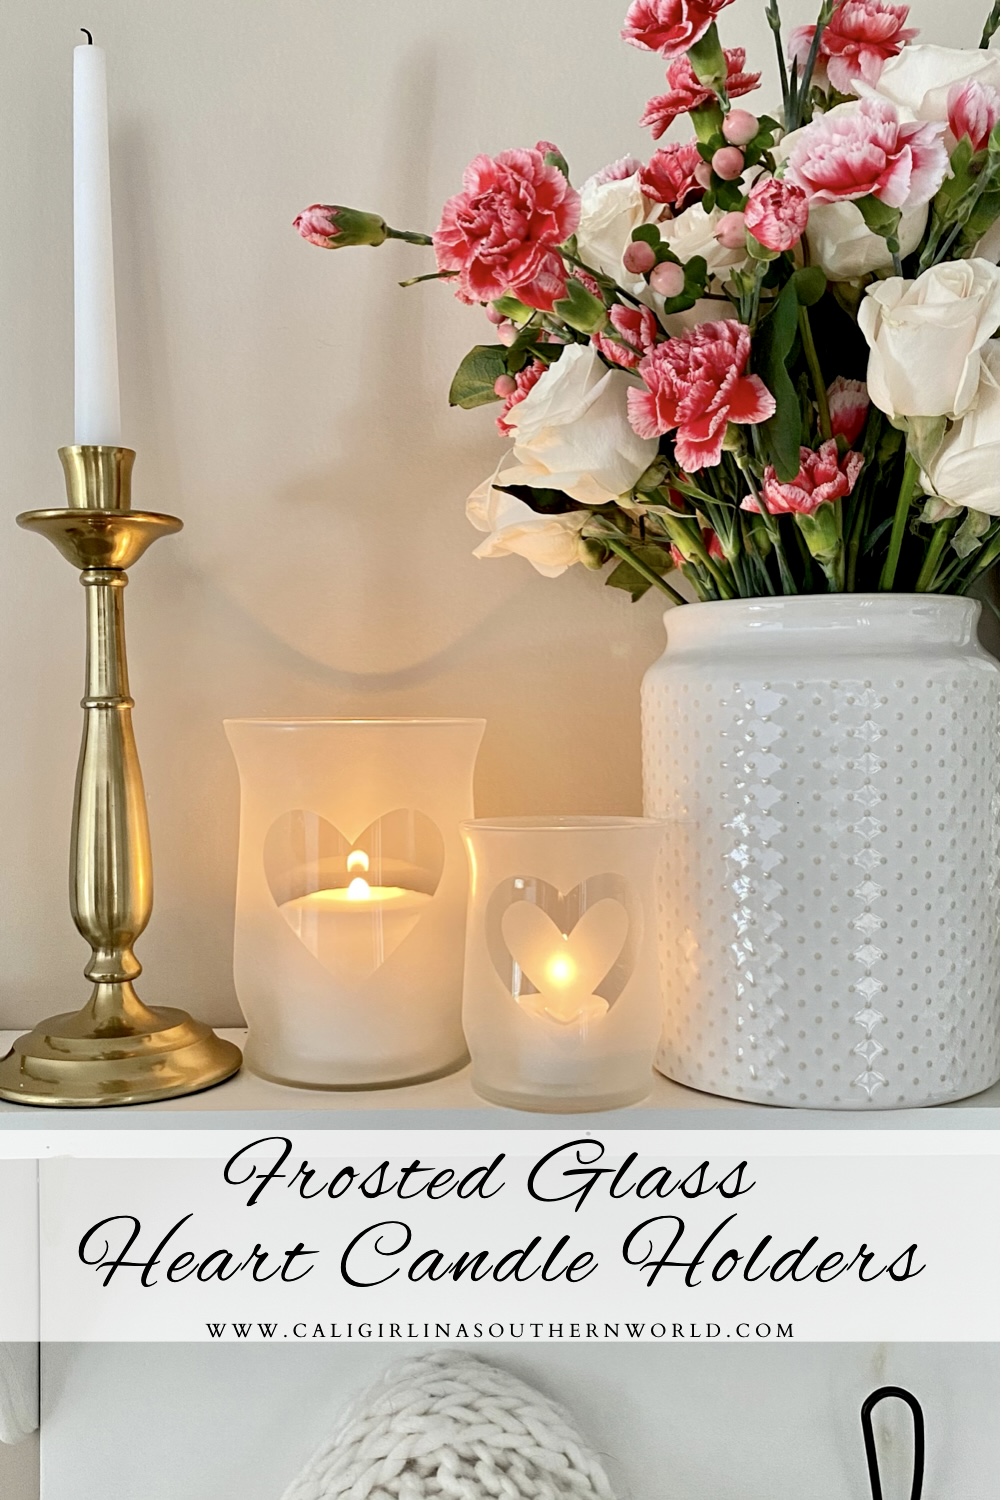 Pinterest Pin for frosted glass heart candle holders.